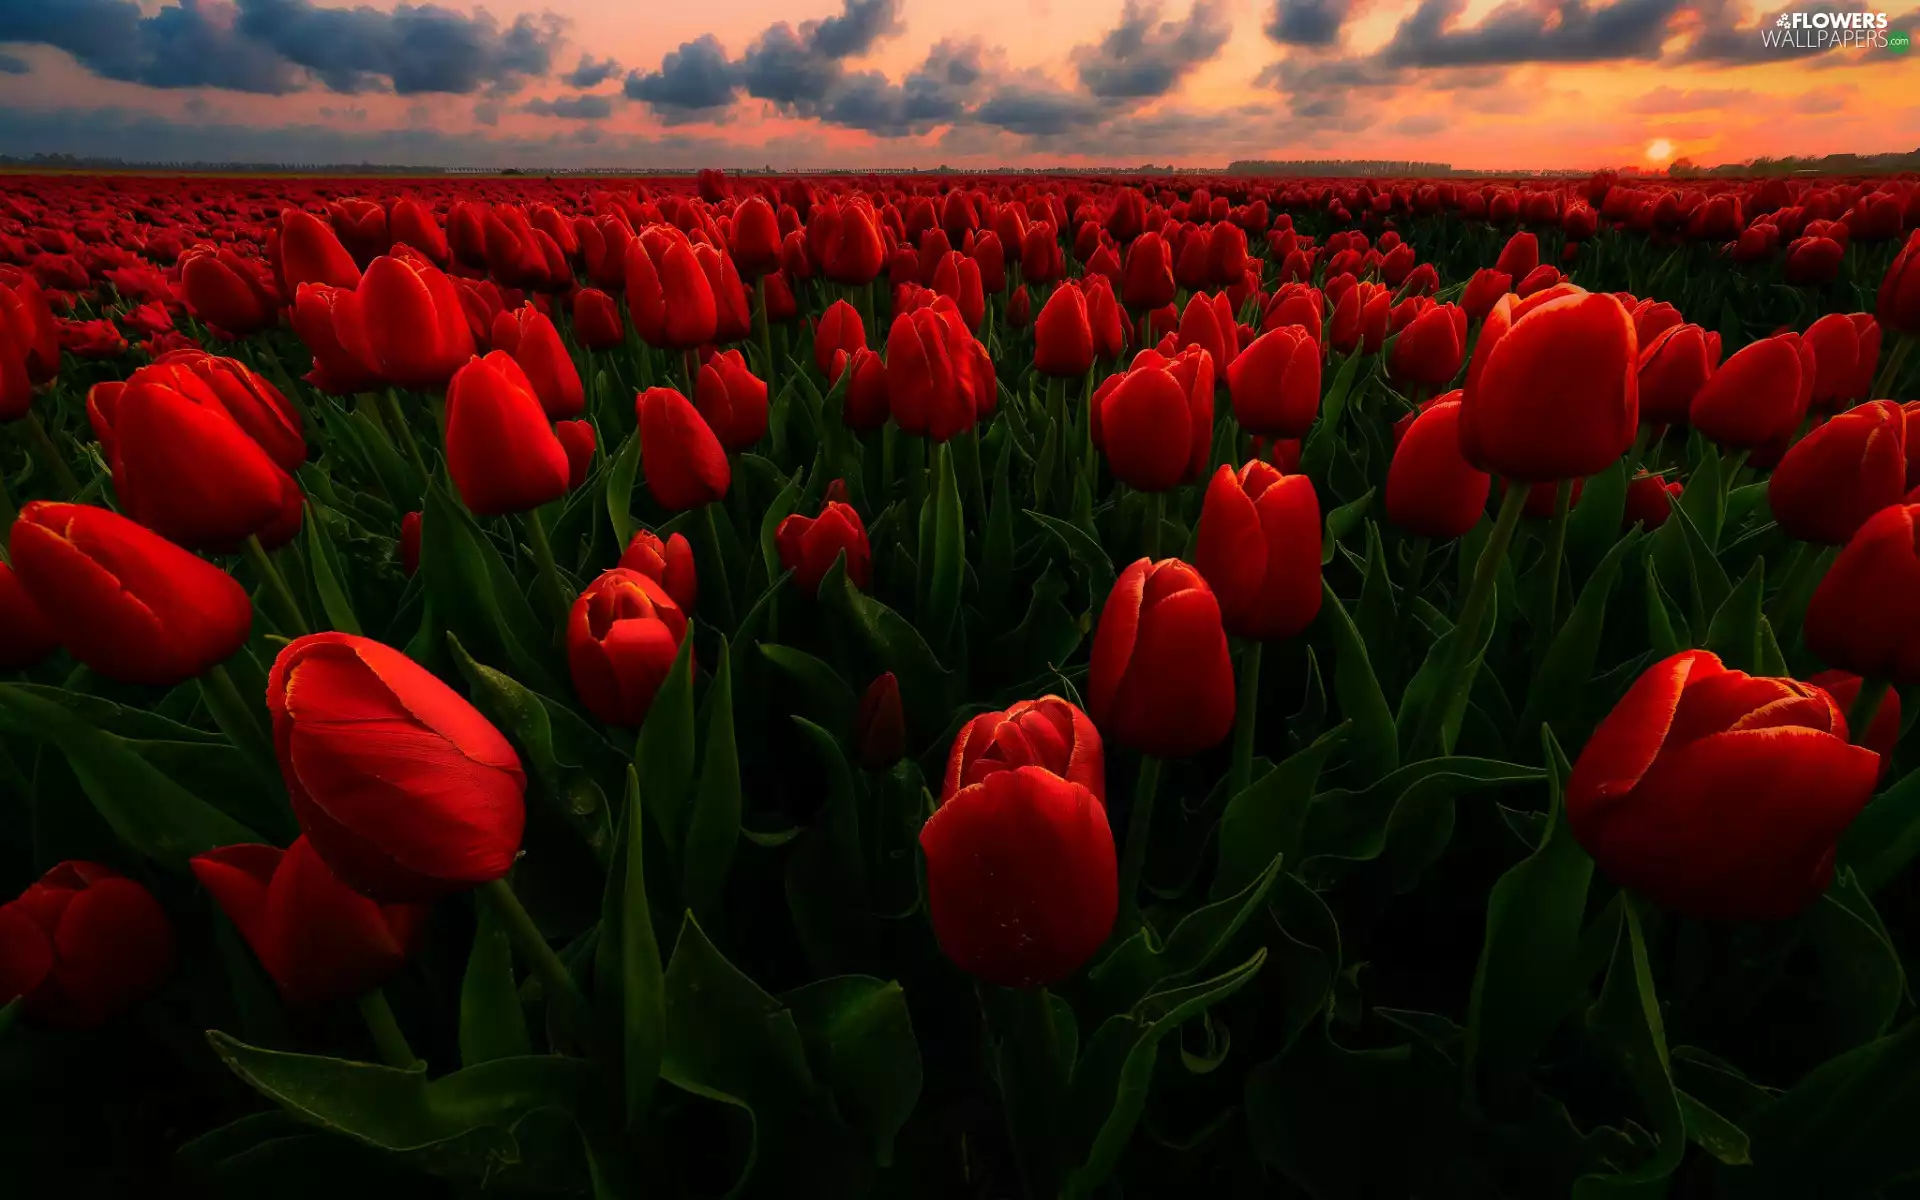 Tulips, Red, clouds, Great Sunsets, Field, Flowers